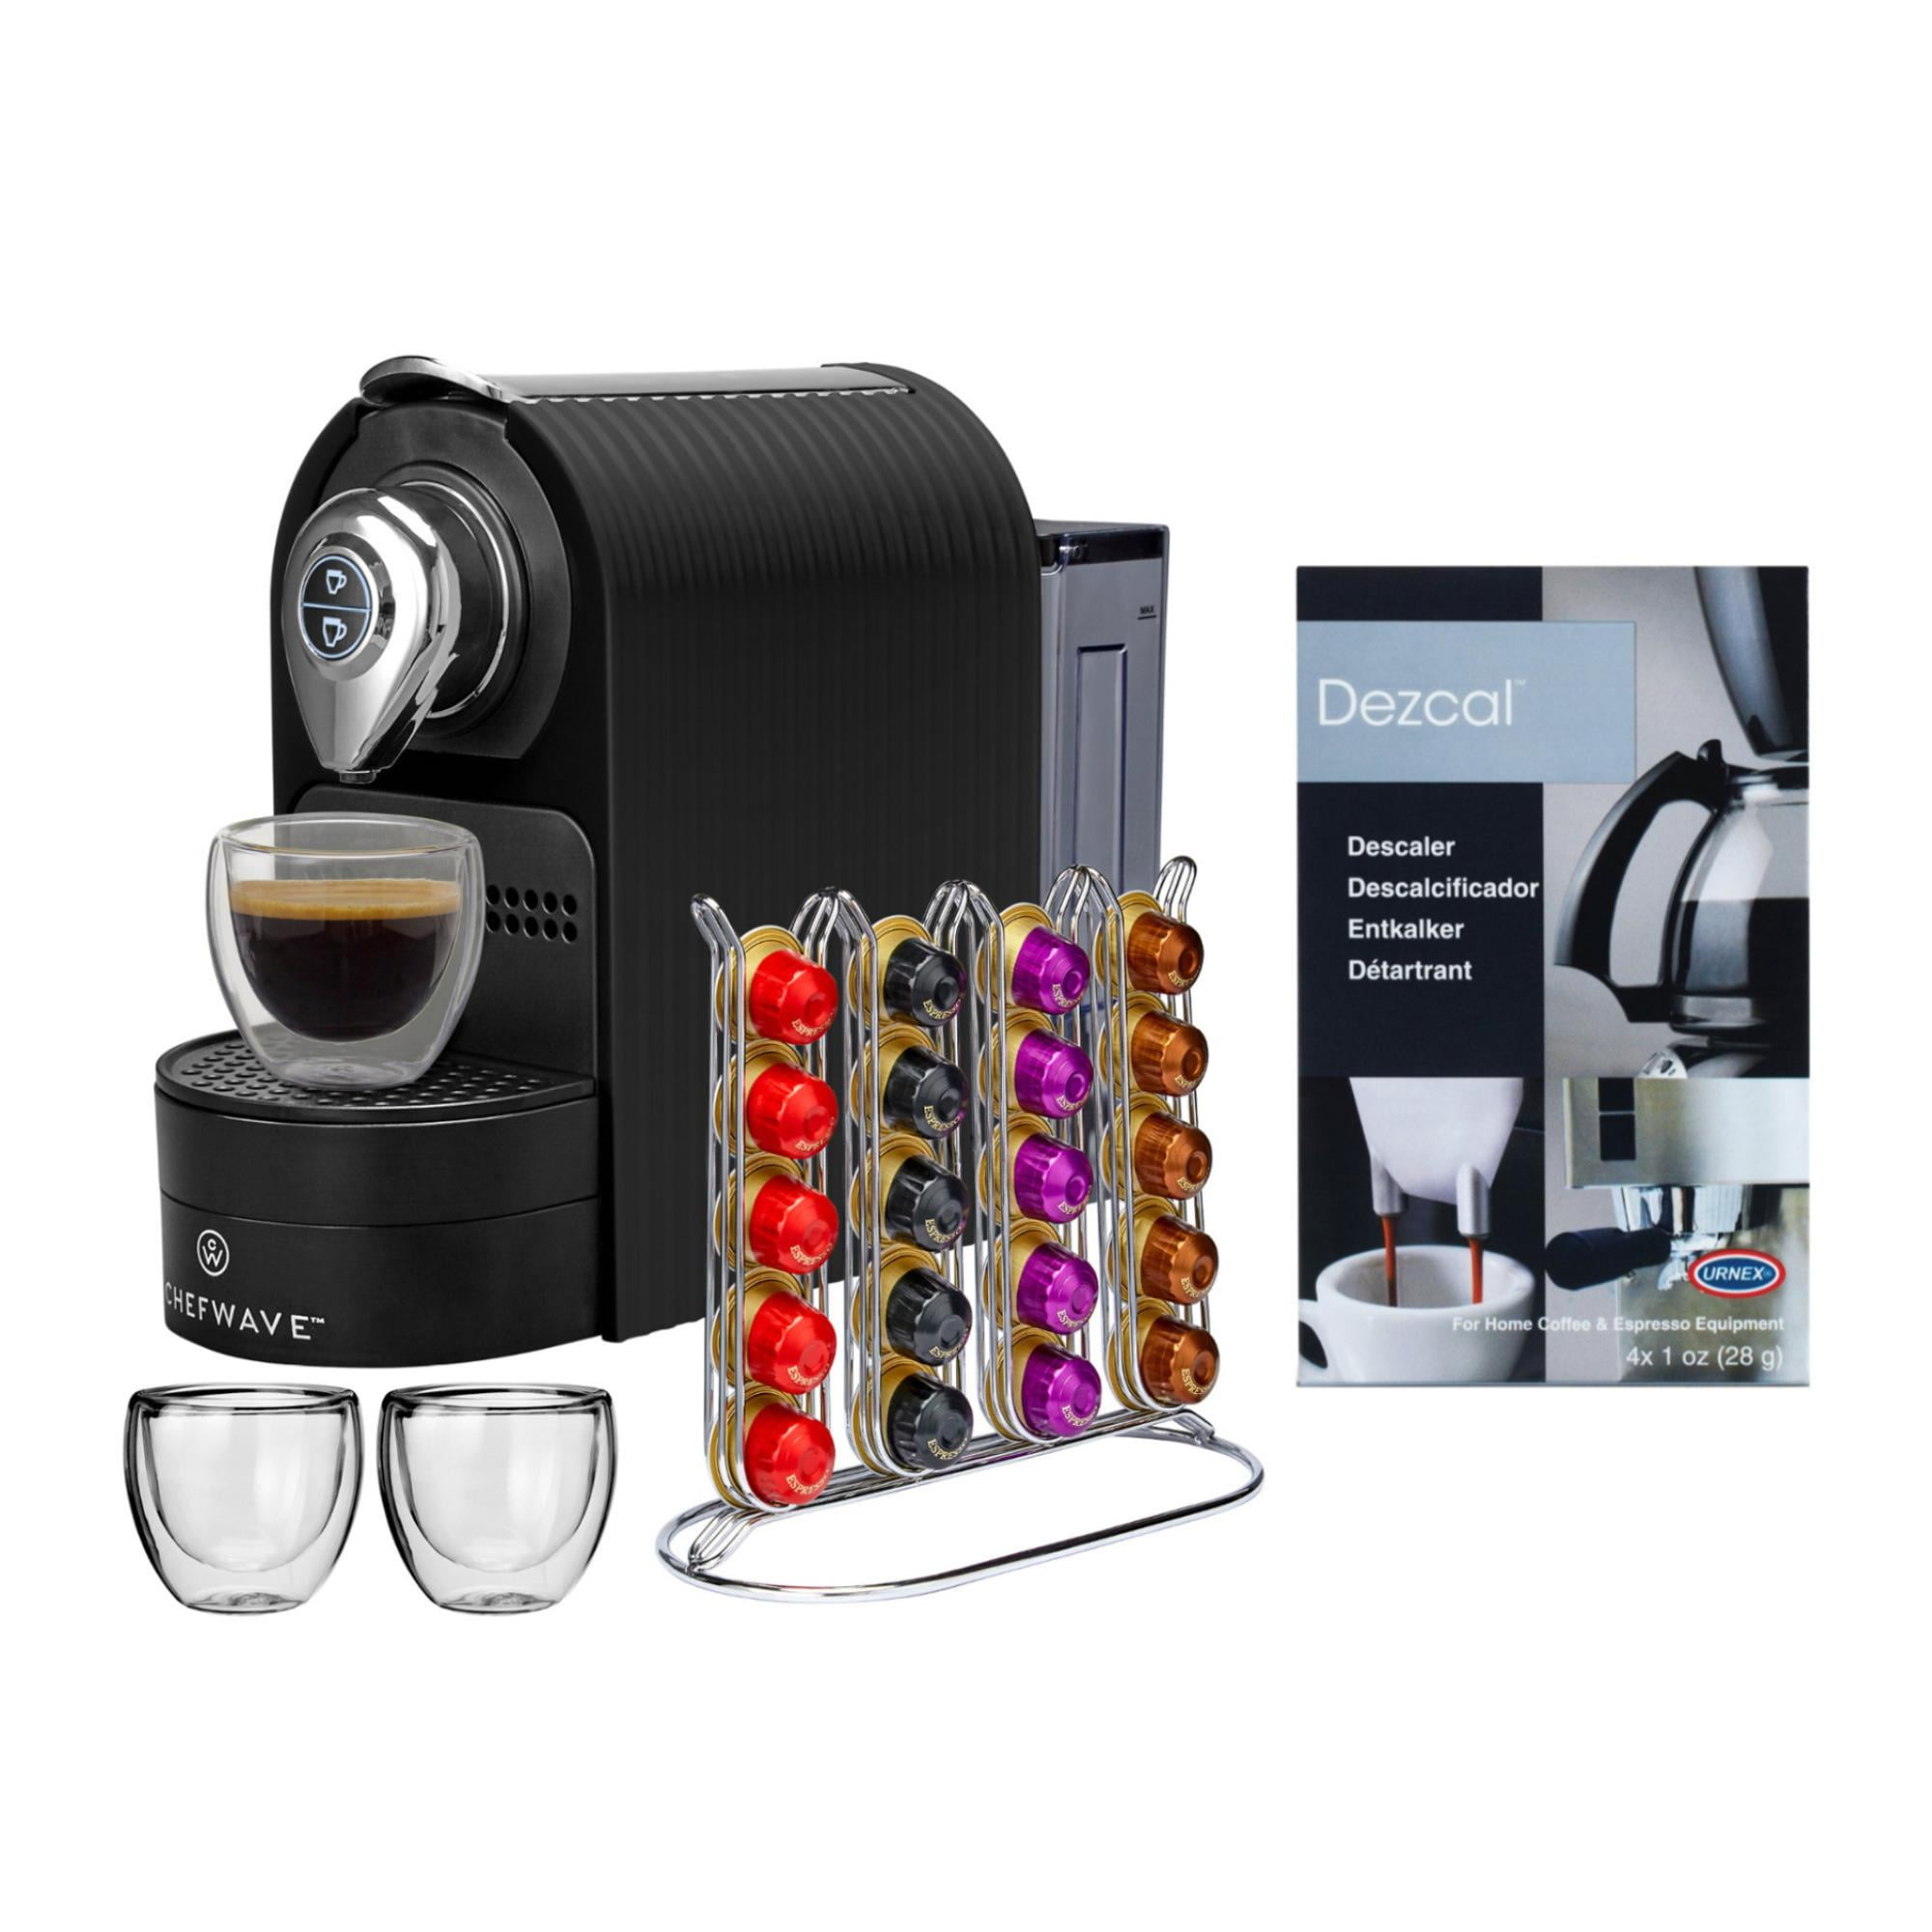 ChefWave Espresso Machine for Nespresso Capsules (Black) with Holder and Cups